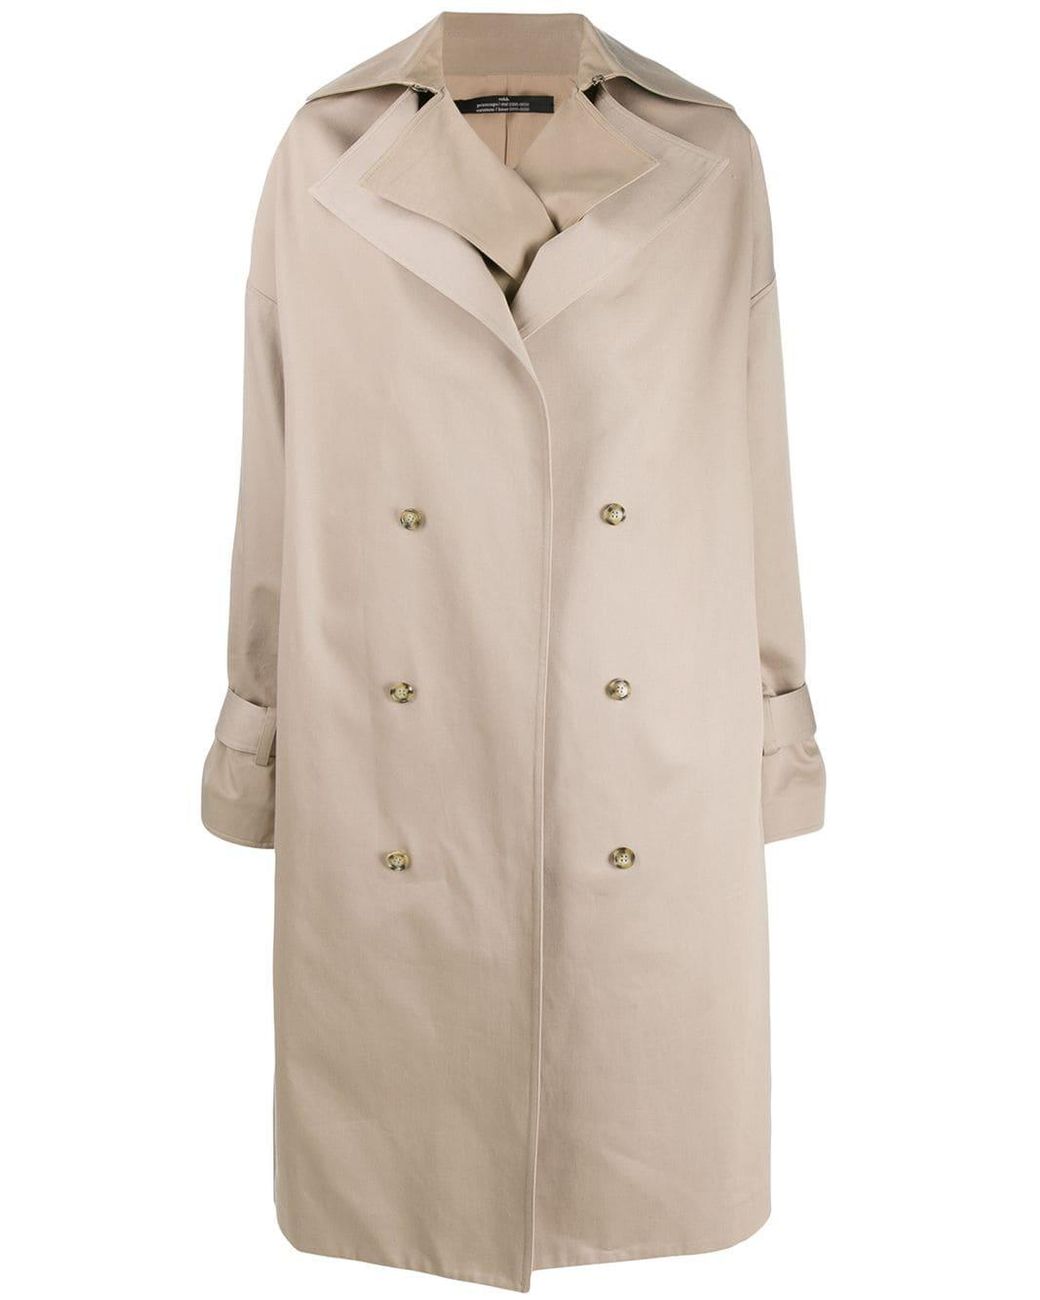 ROKH Oversized Trench Coat in Natural - Lyst